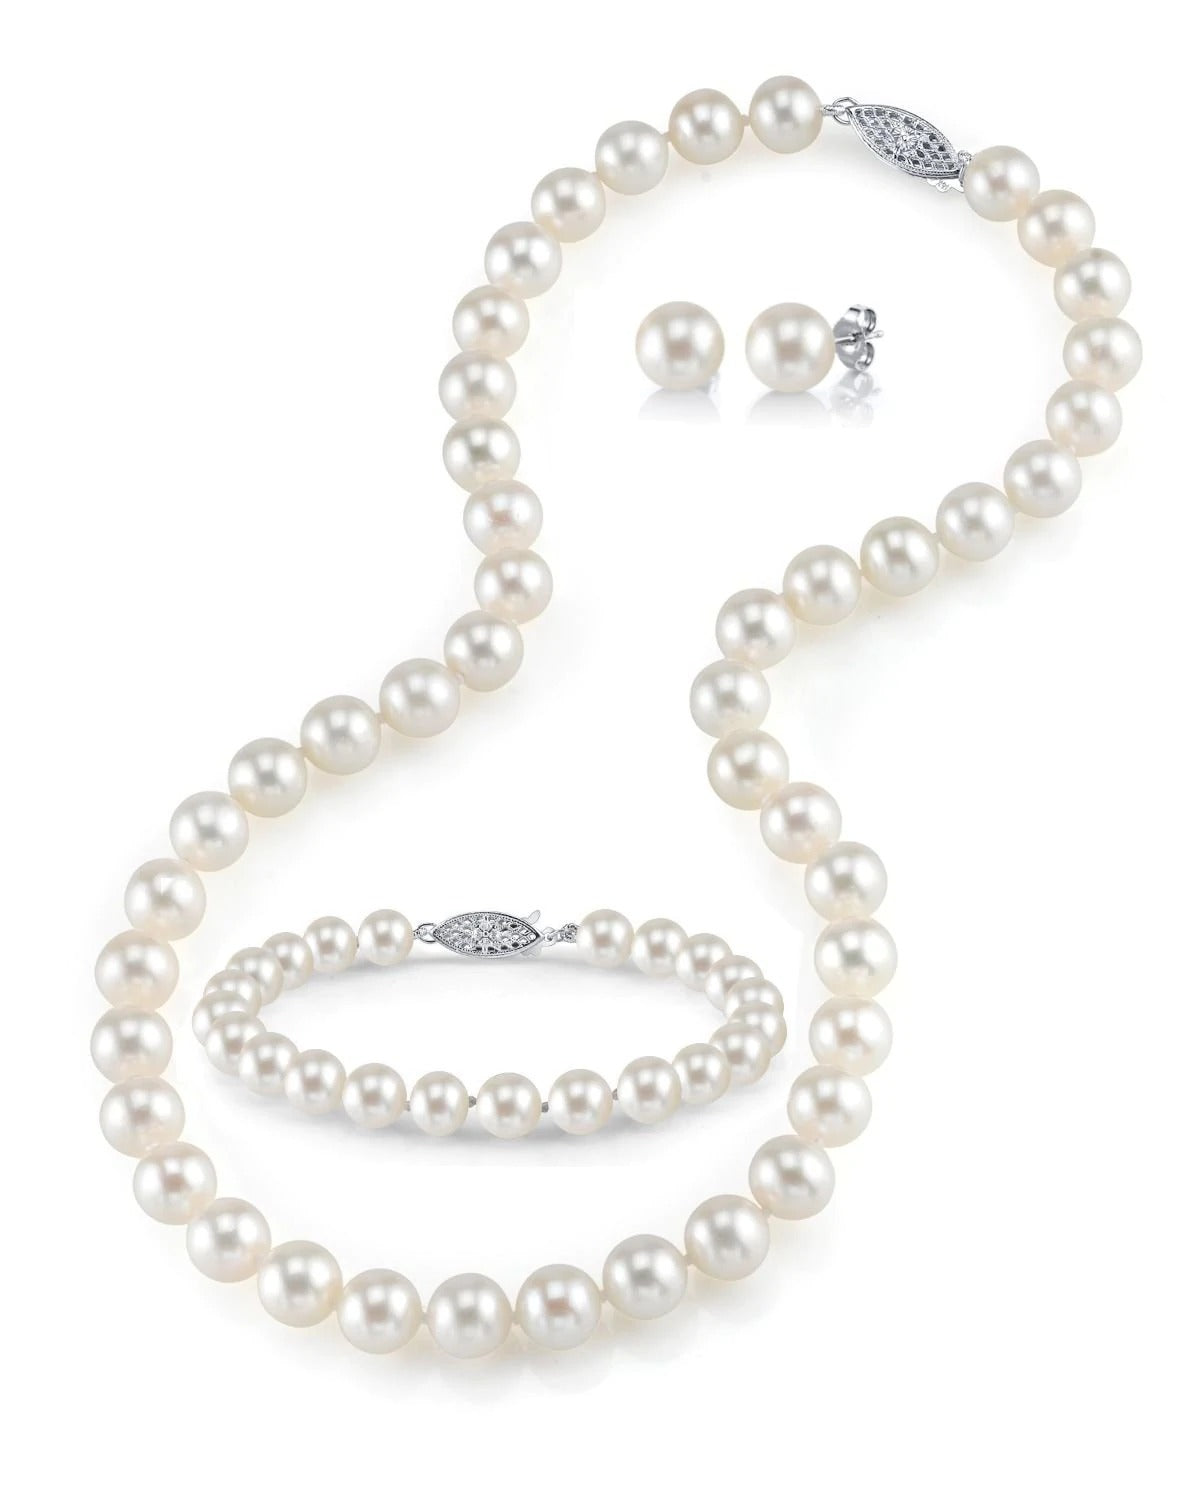 Details of what's included in the 3-piece White Freshwater Pearl Set - Necklace, Bracelet and Earrings